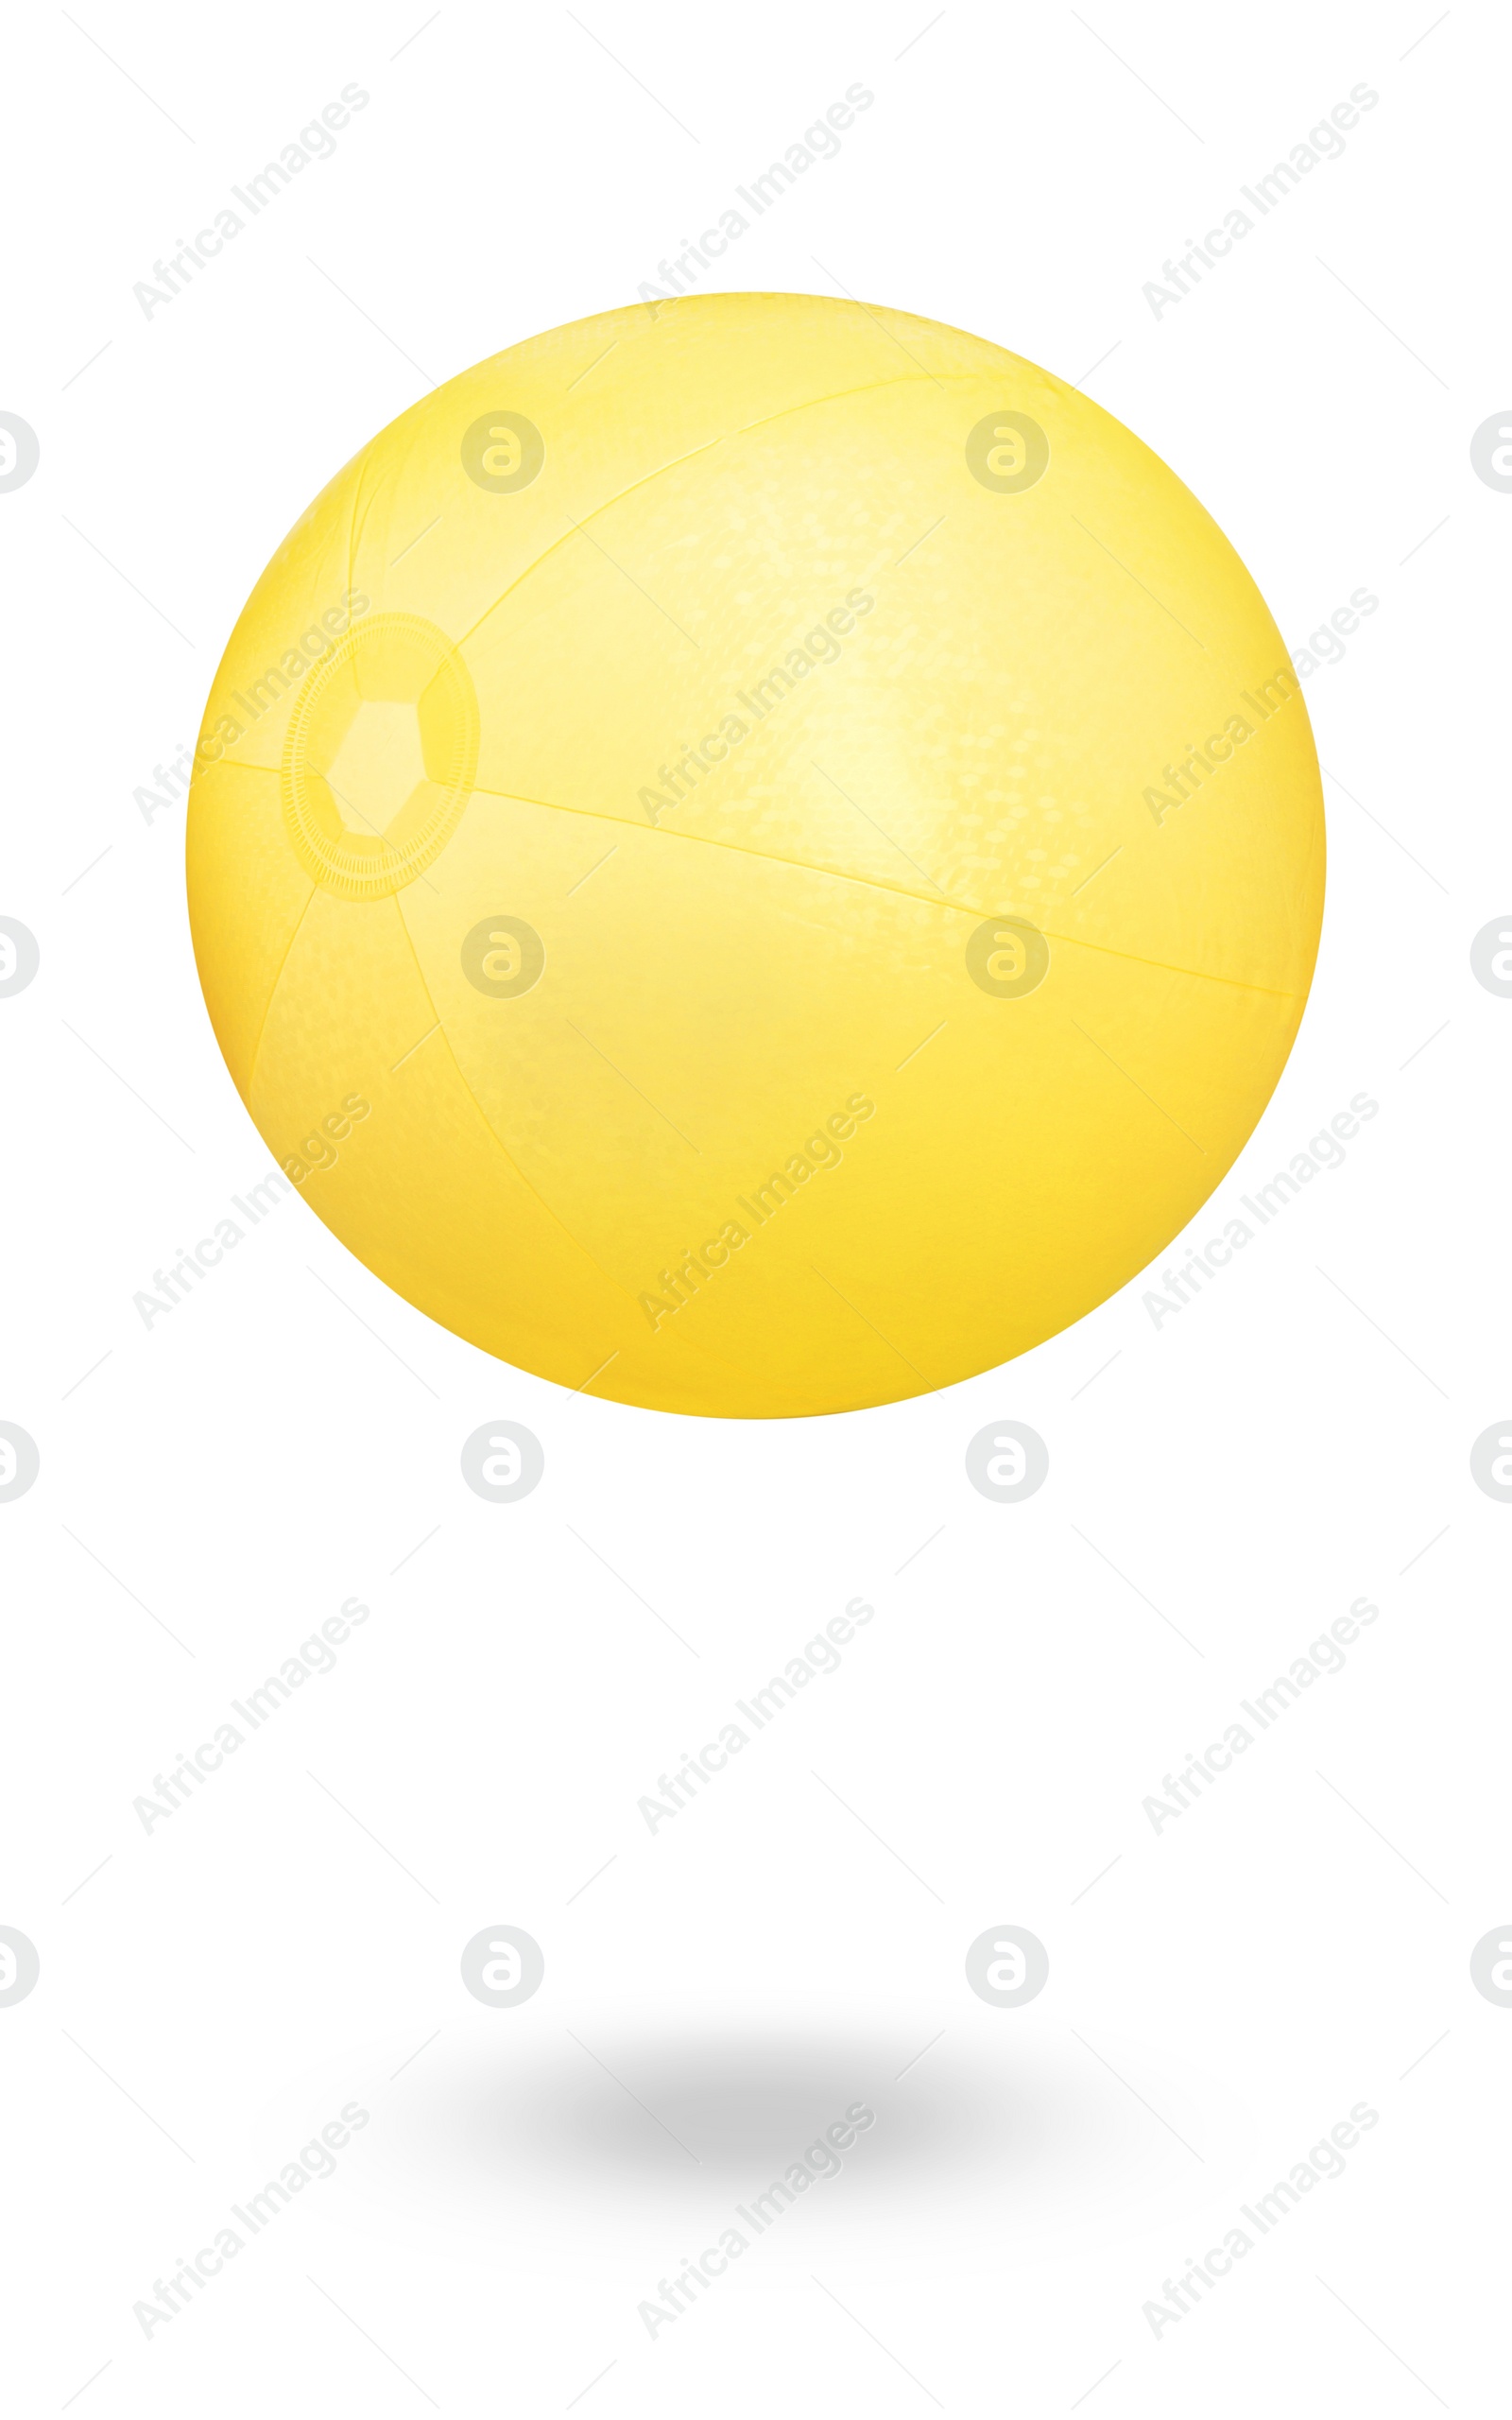 Image of Inflatable yellow beach ball on white background 